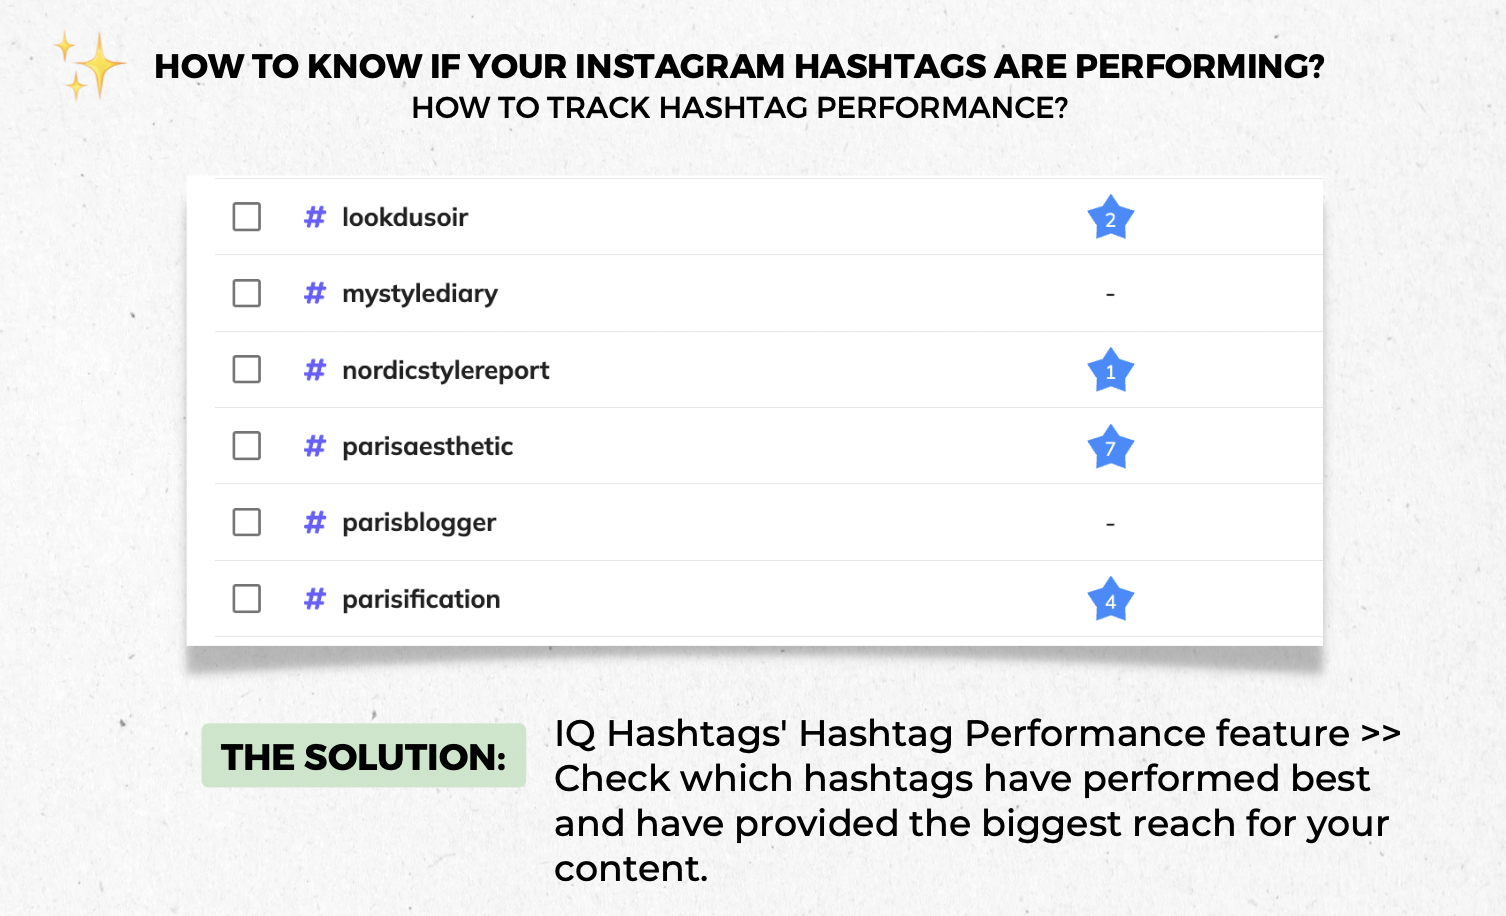 how to check your hashtag performance as a photographer